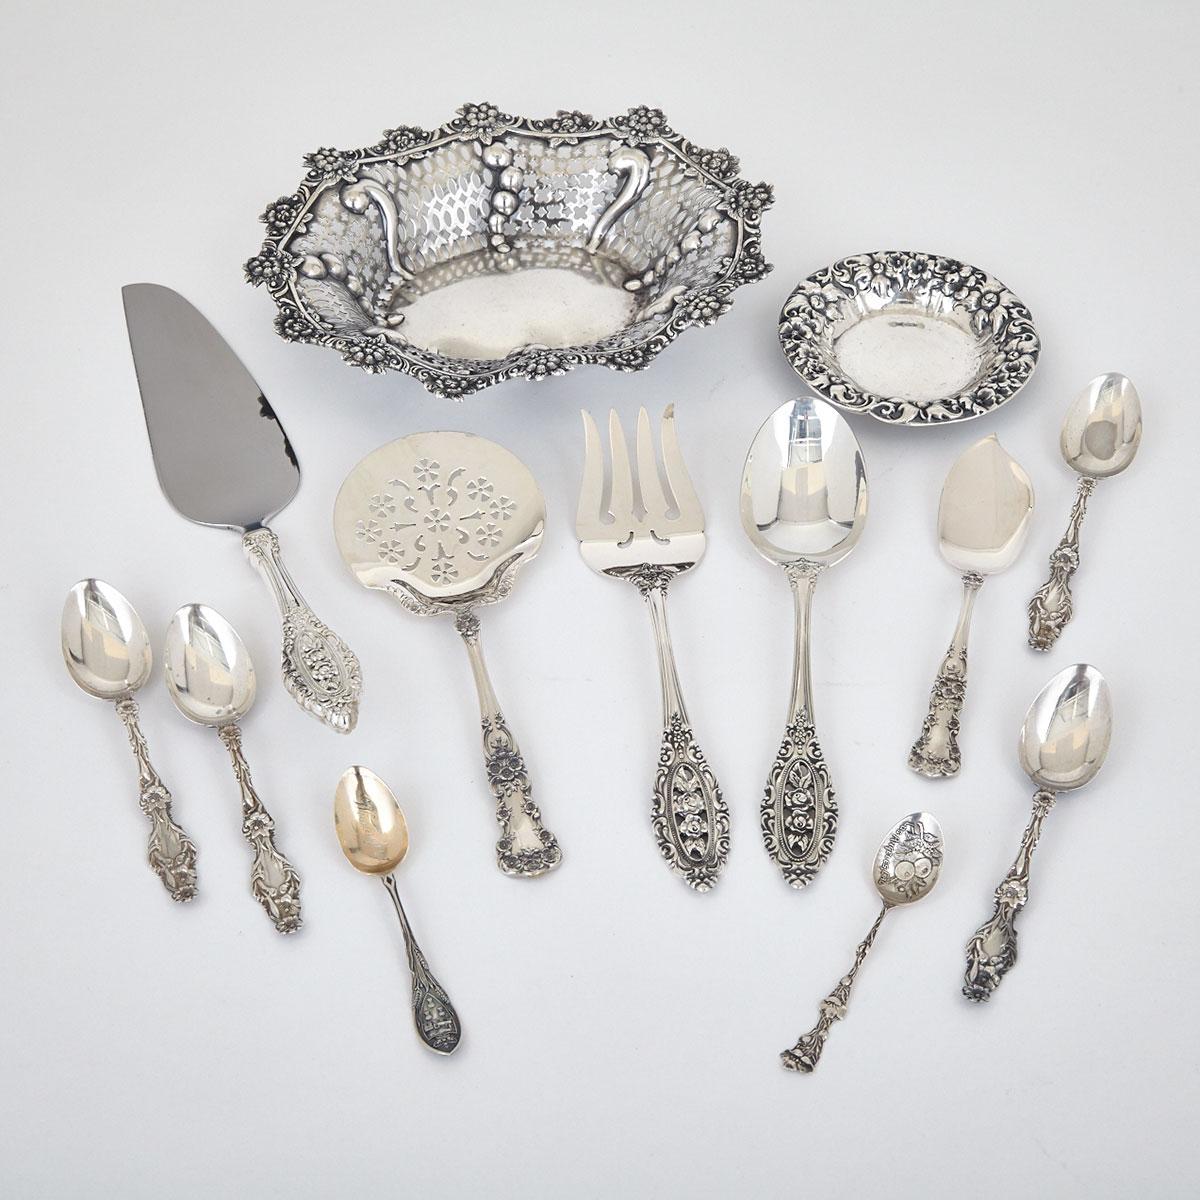 Grouped Lot of Victorian and Later North American Silver, late 19th/20th century